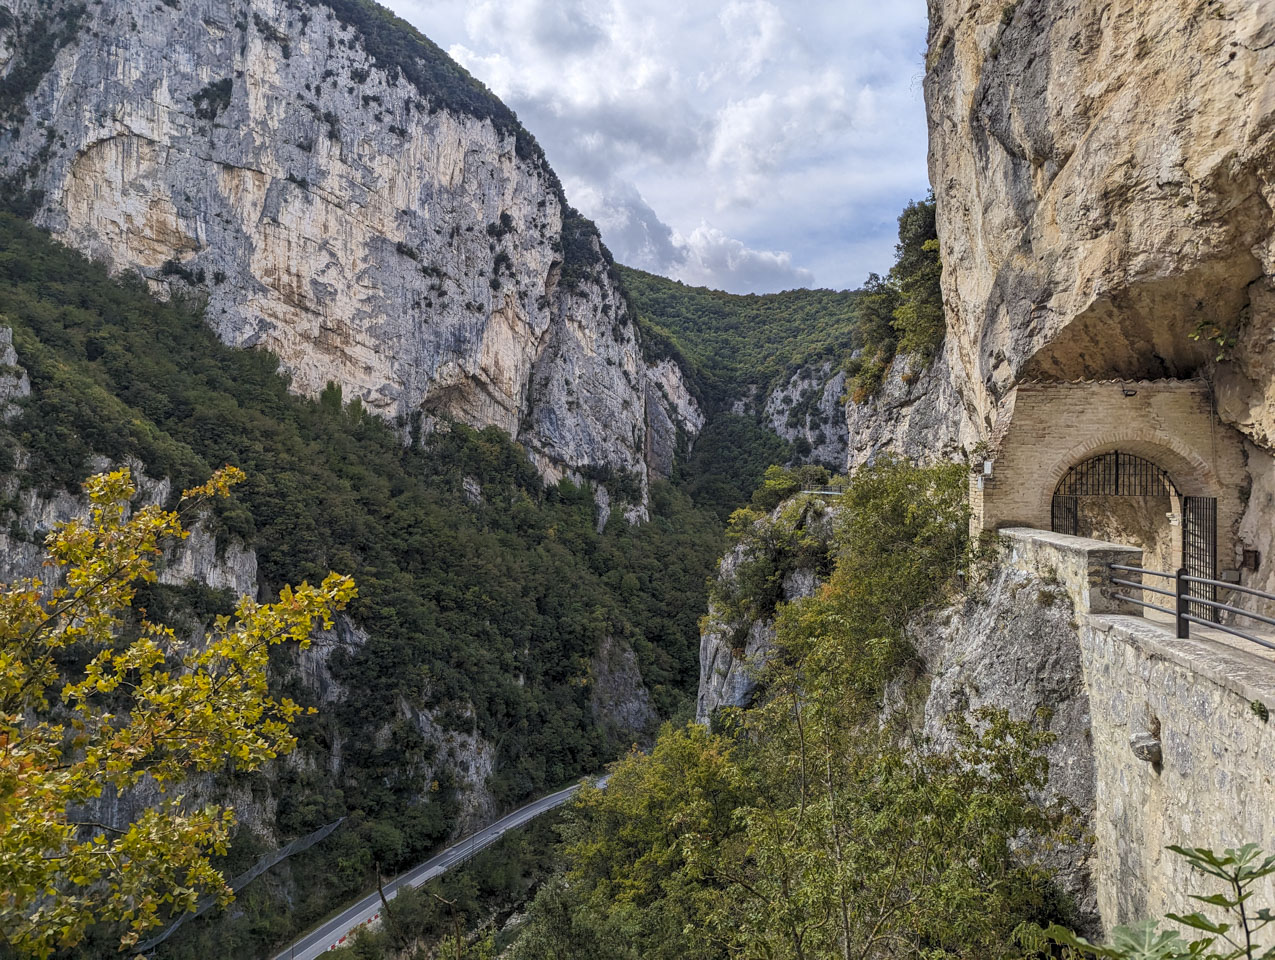 Frasassi Gorge as seen from the Tempio del Valadier